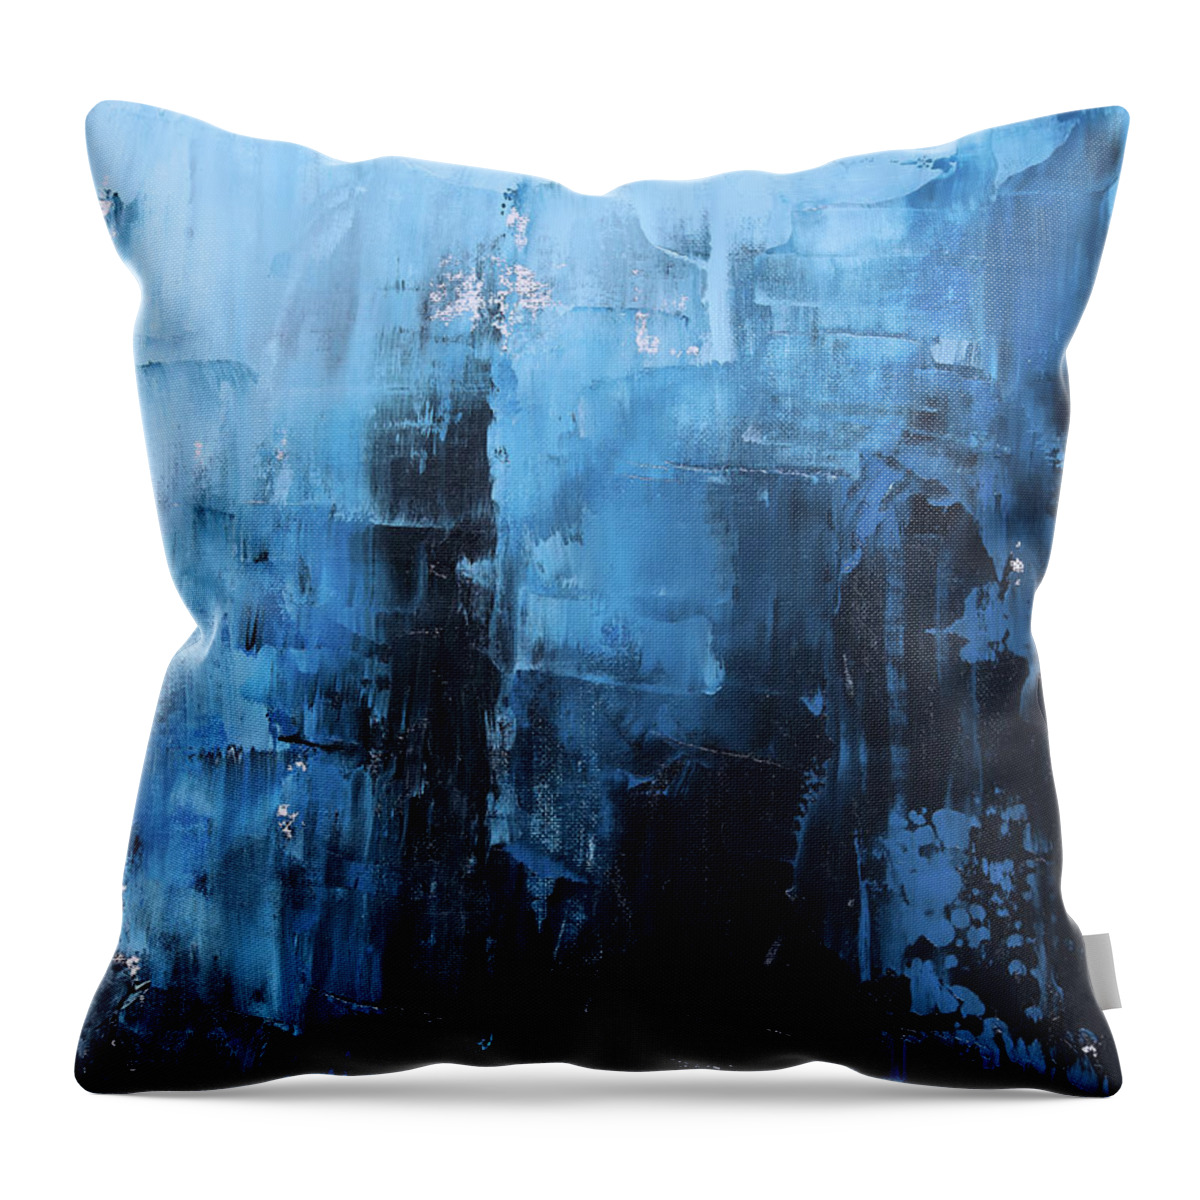 Blue Throw Pillow featuring the painting Open sea by Sv Bell